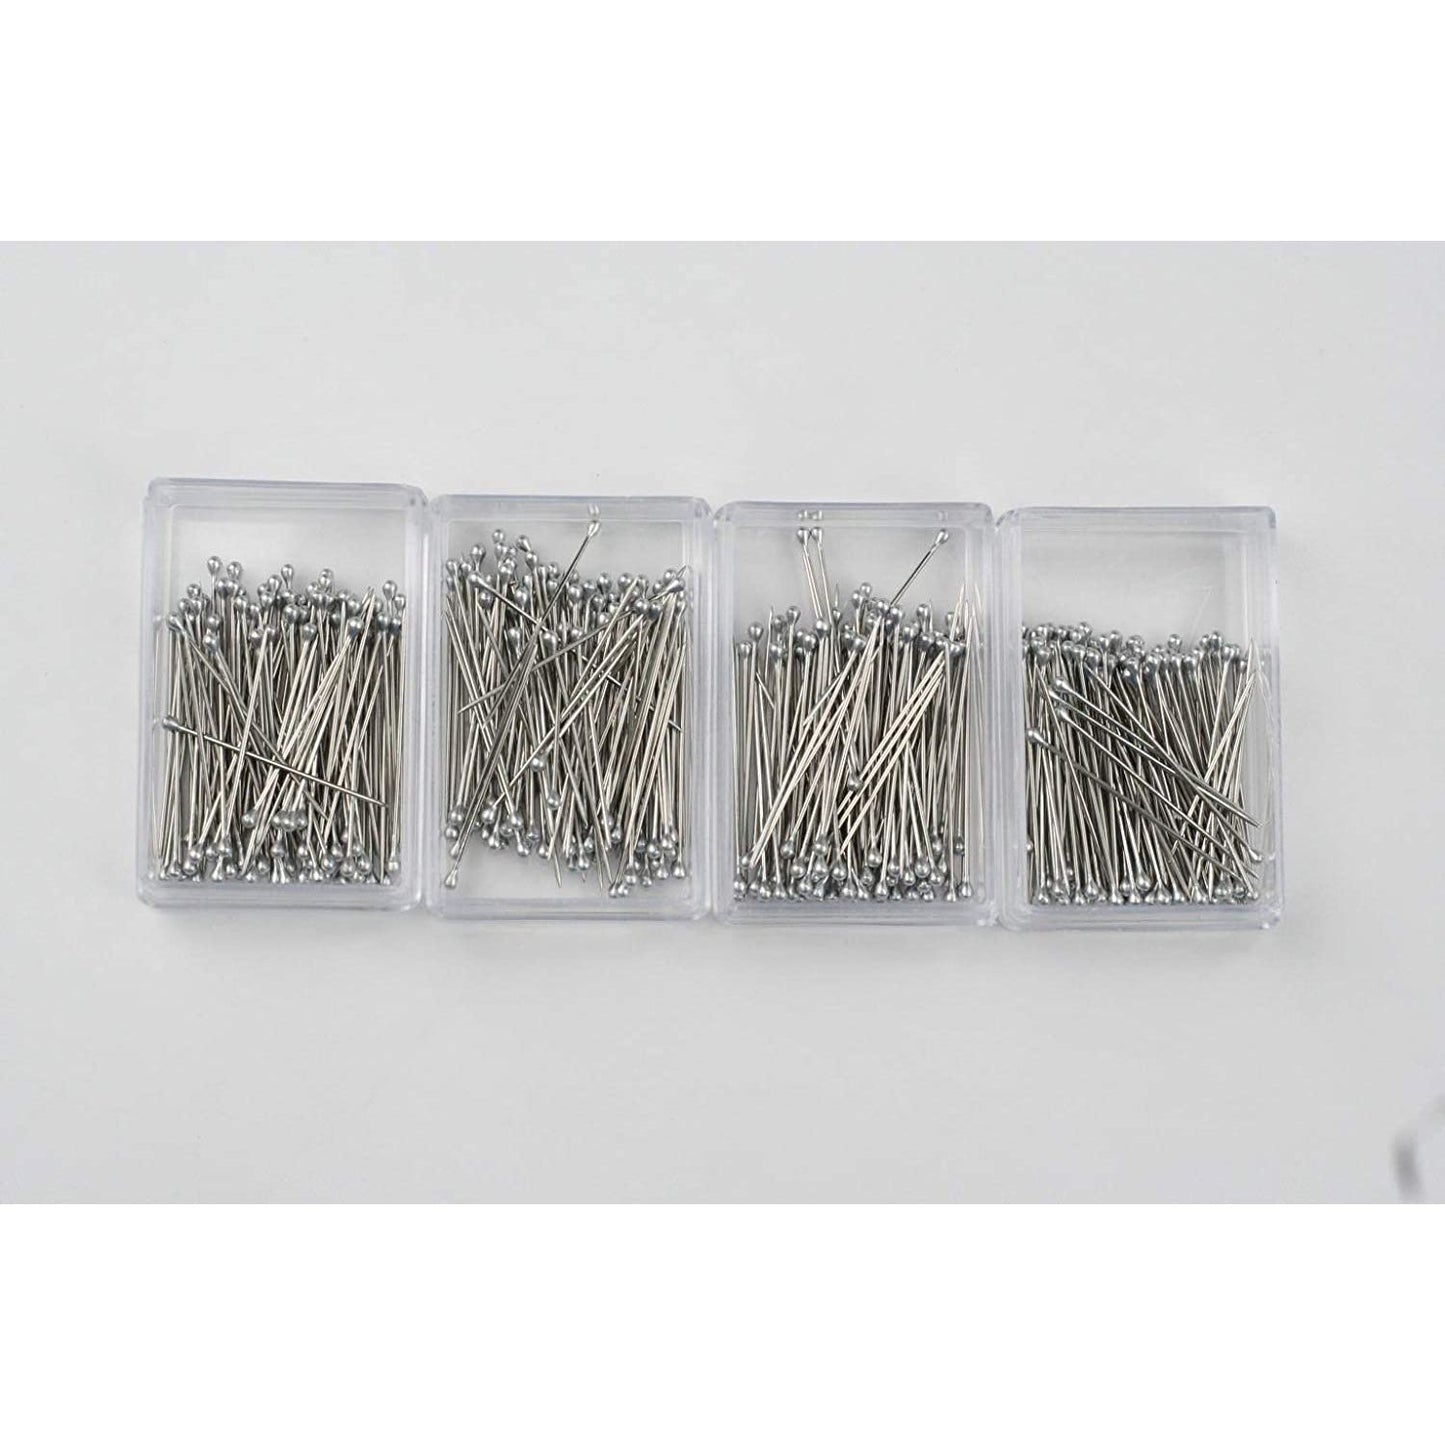 decorative sewing silvertone ball head pins 3cm (approx 1.20in) round manmade corsage pin straight dressmaking pins